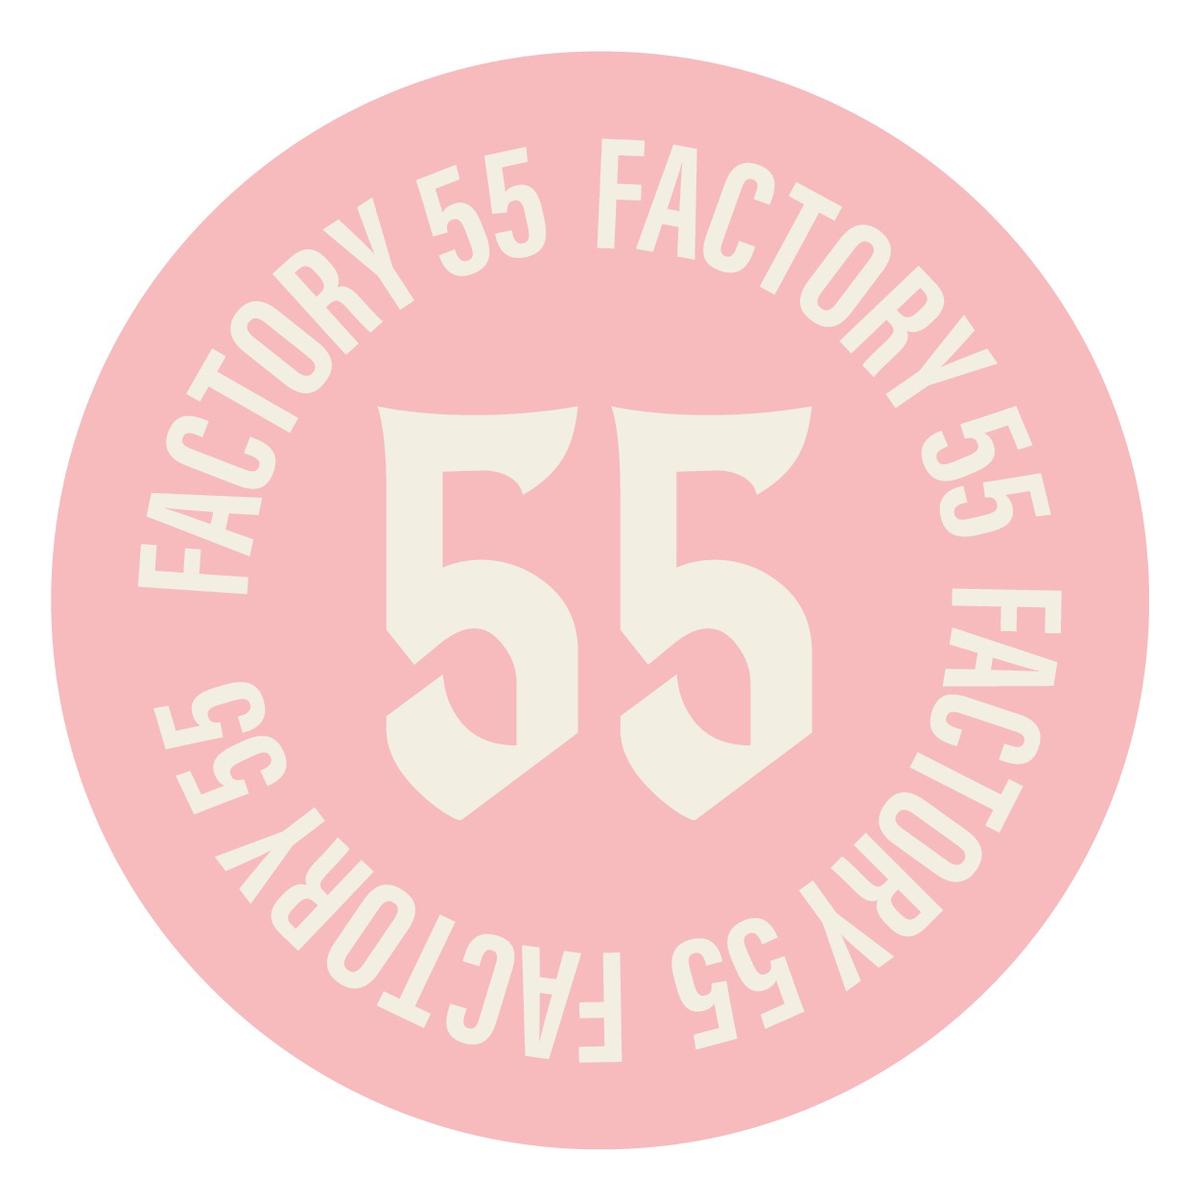 FACTORY 55 's images